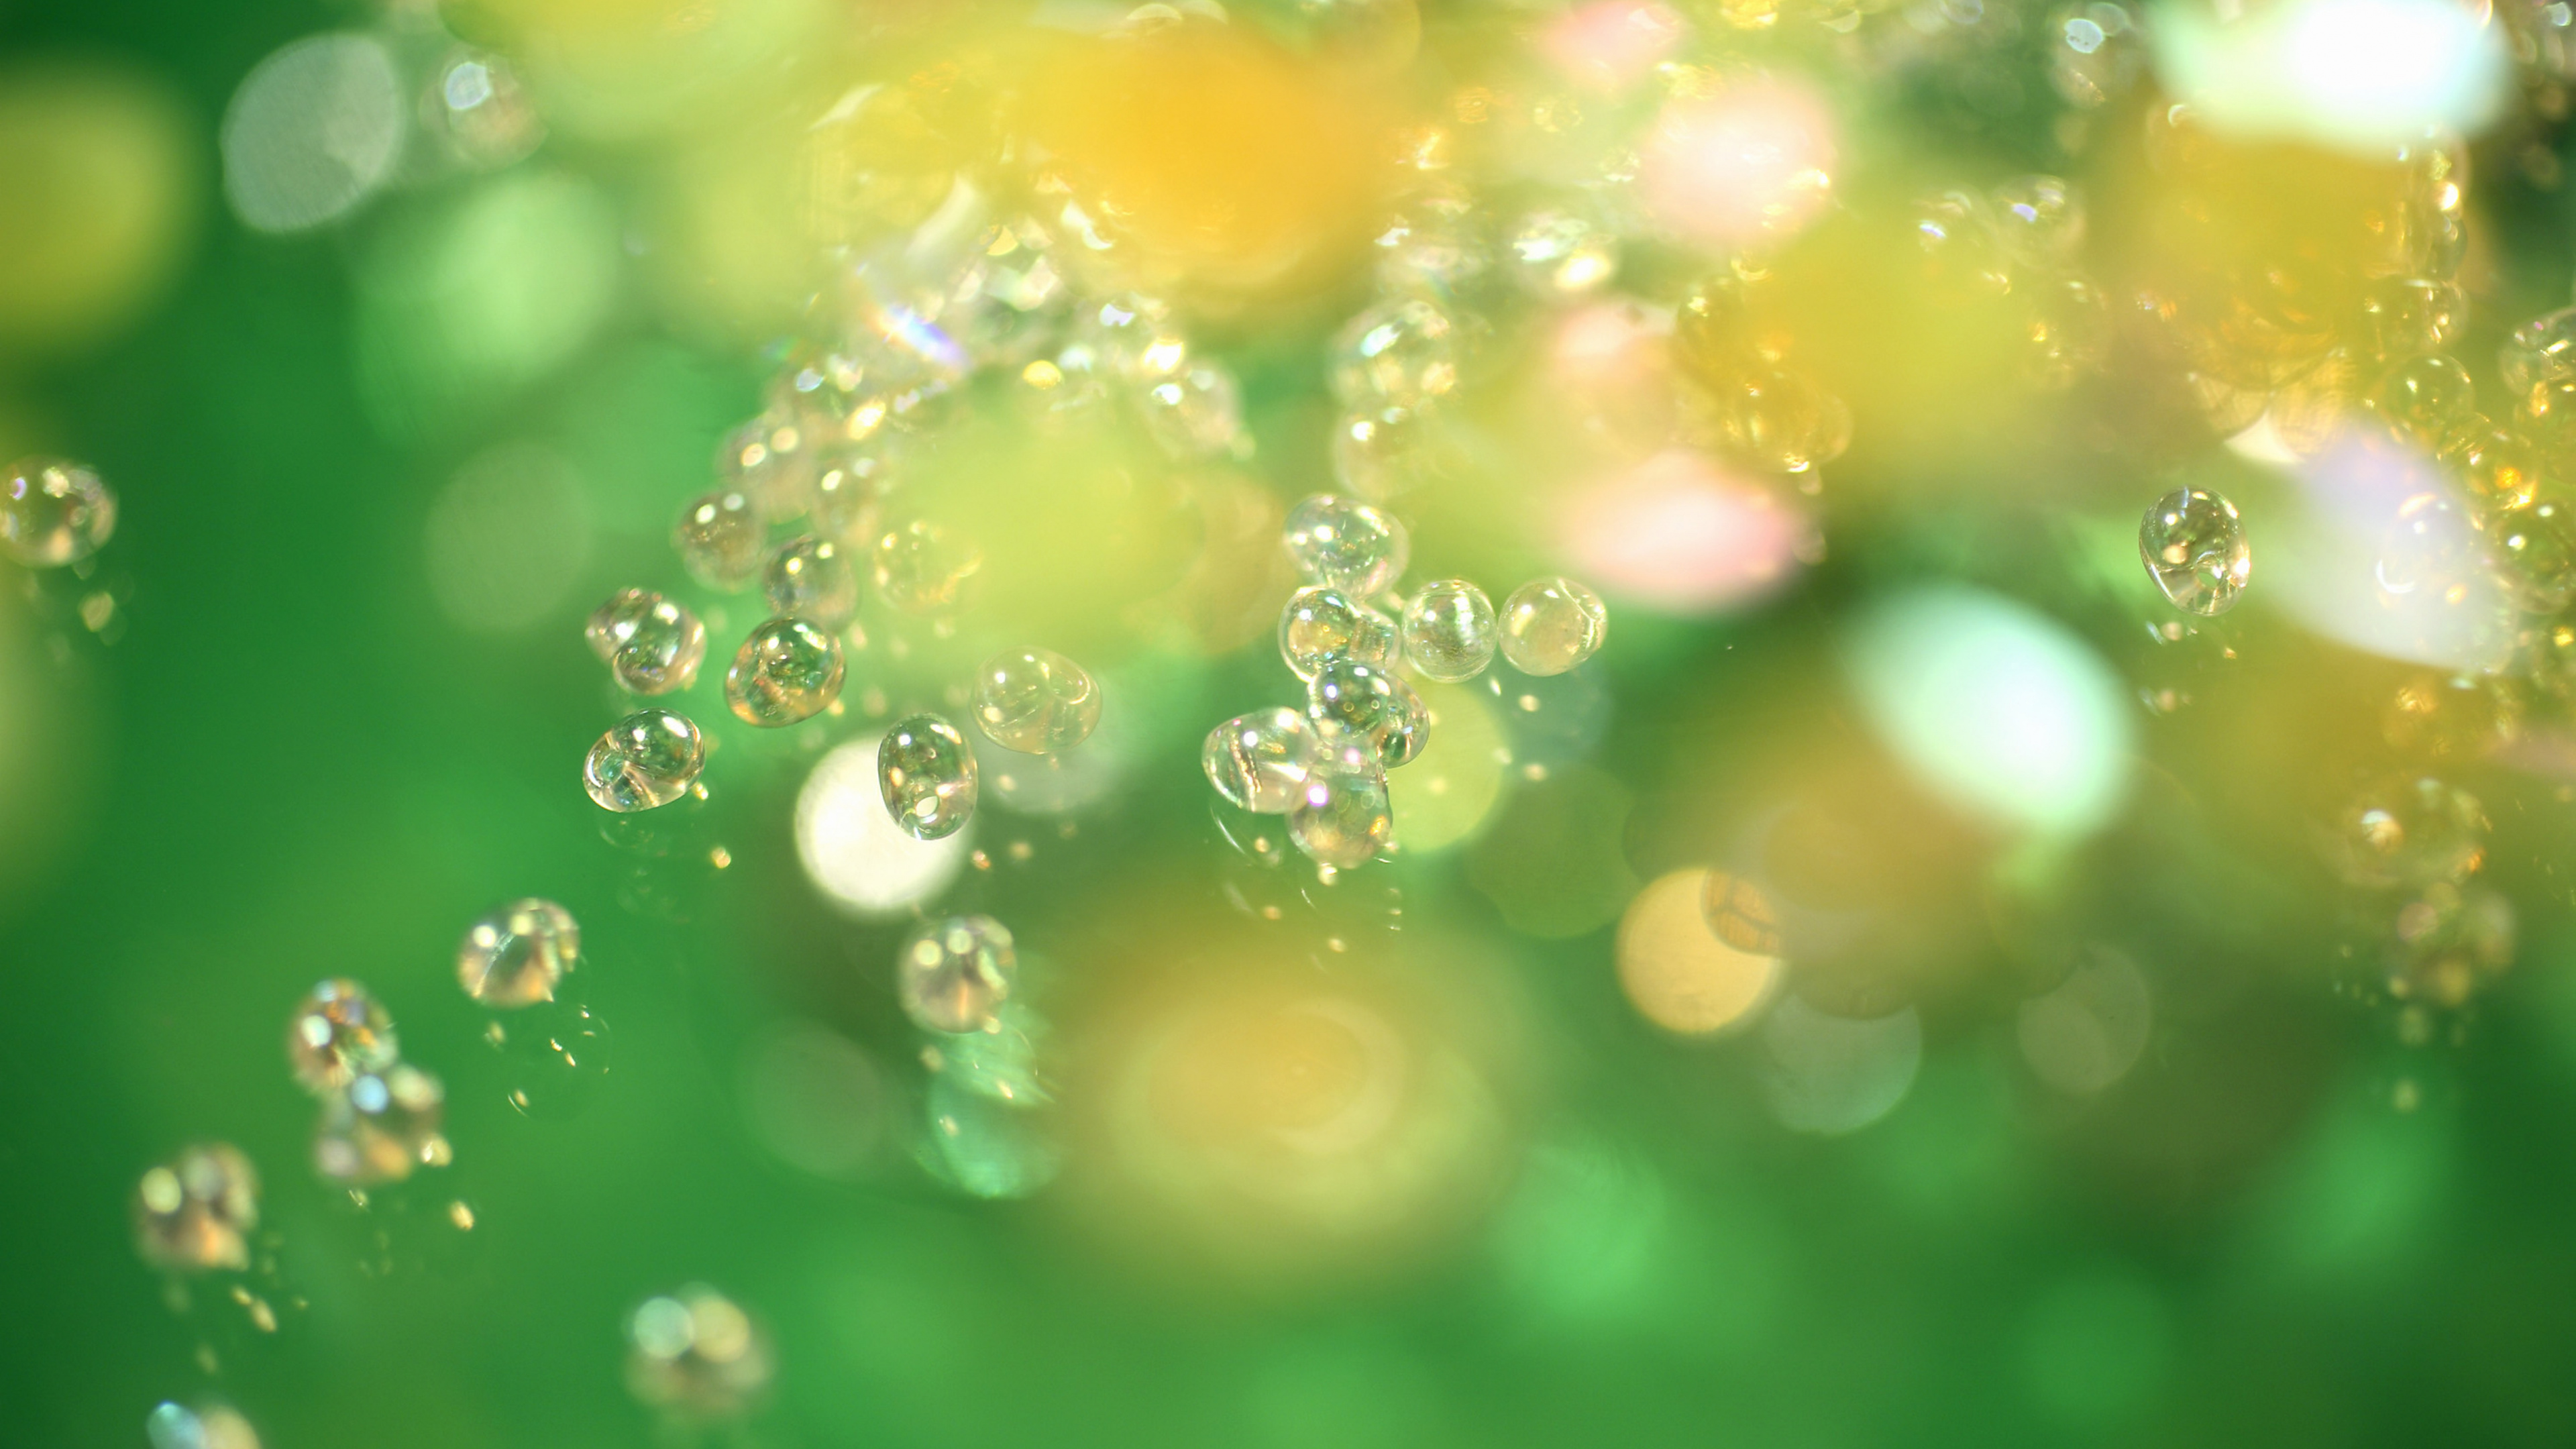 Water Droplets on Green Surface. Wallpaper in 3840x2160 Resolution